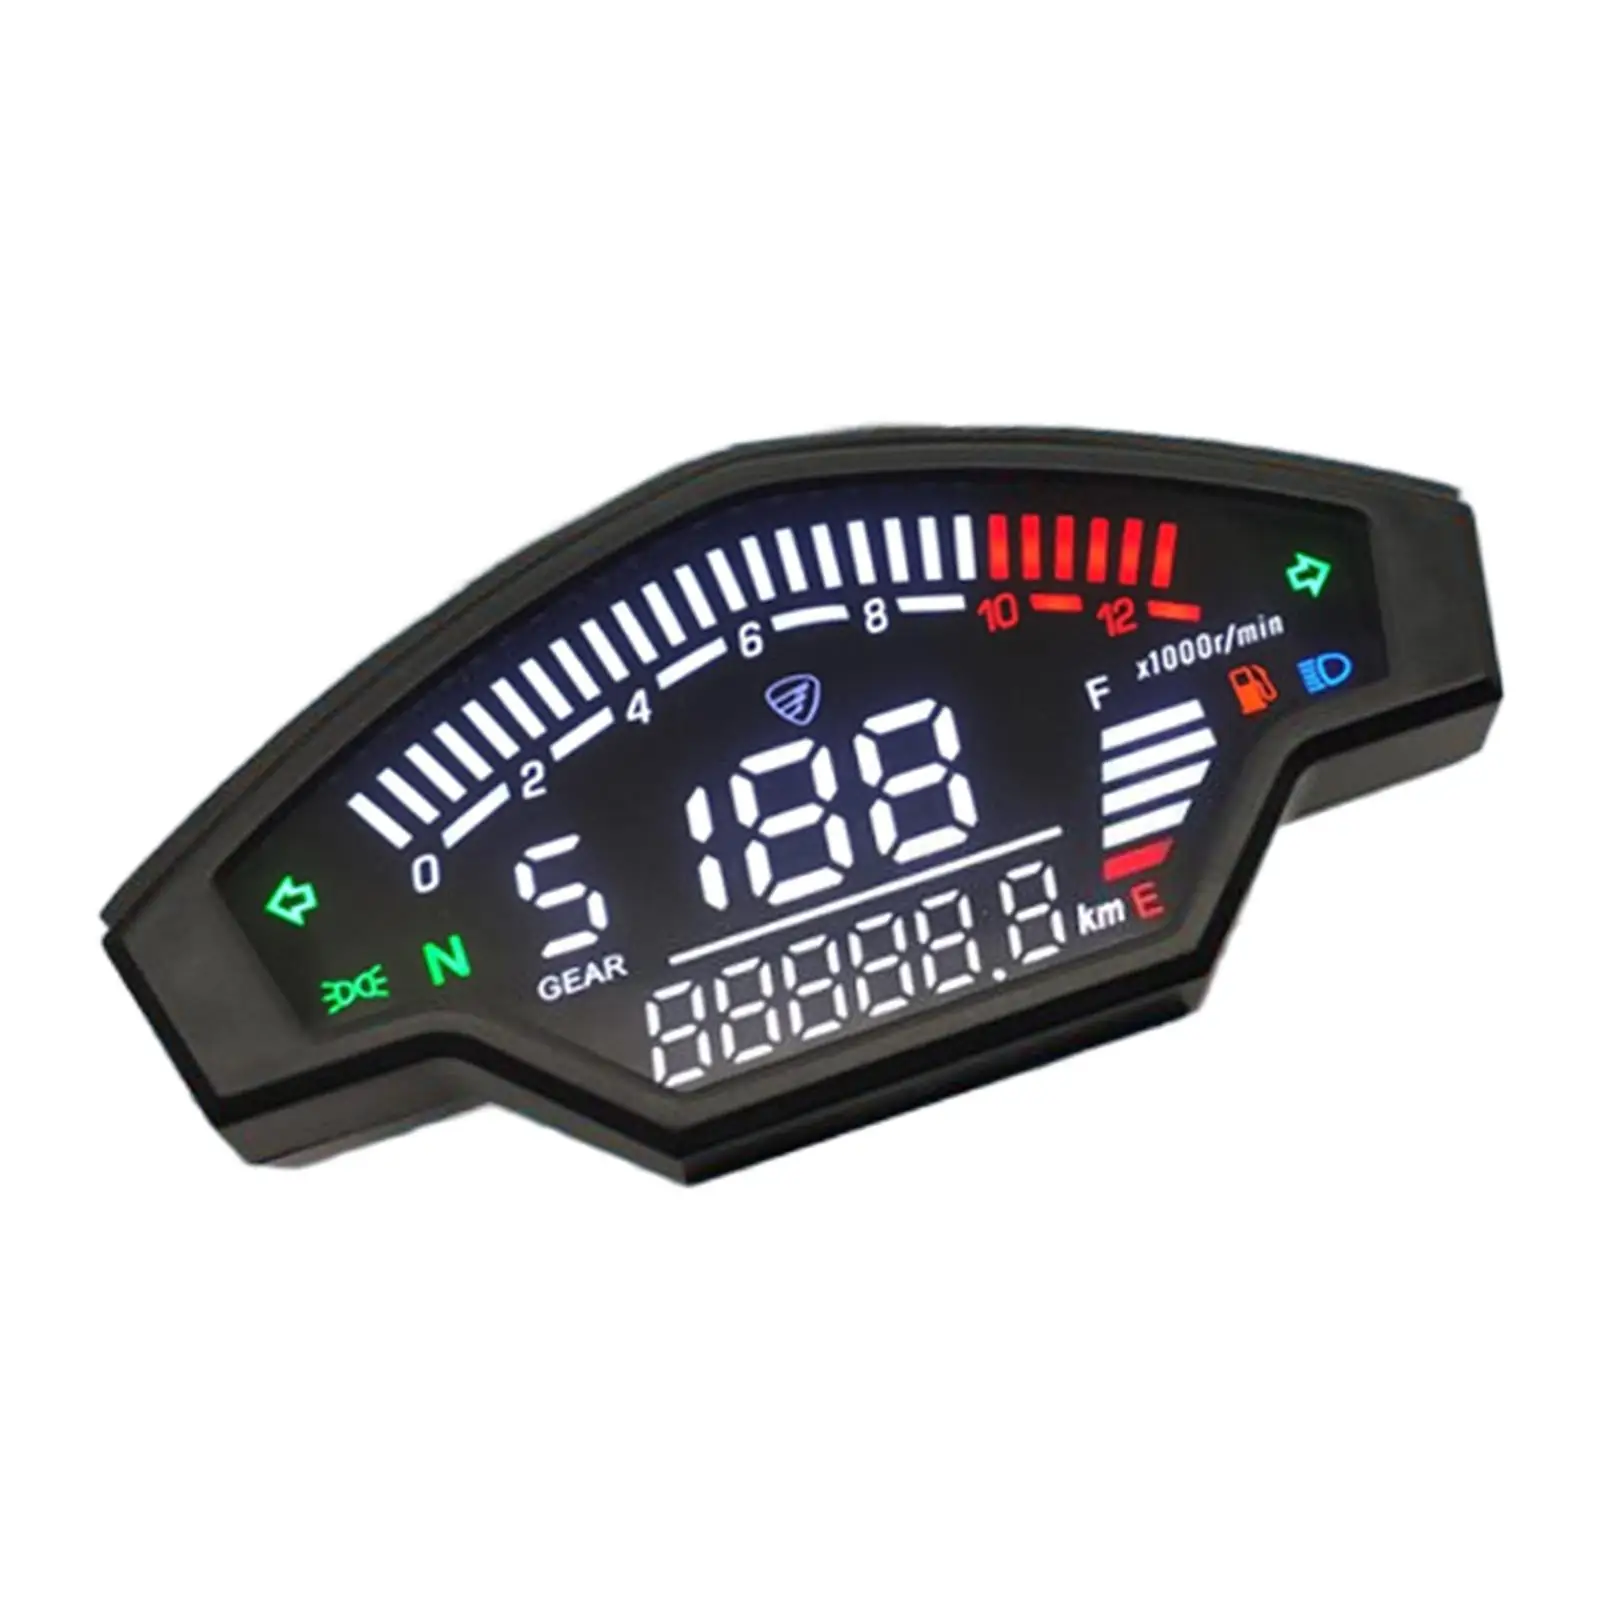 Professional Motorcycle Speedometer for KR200 Electric Motorcycle Modification